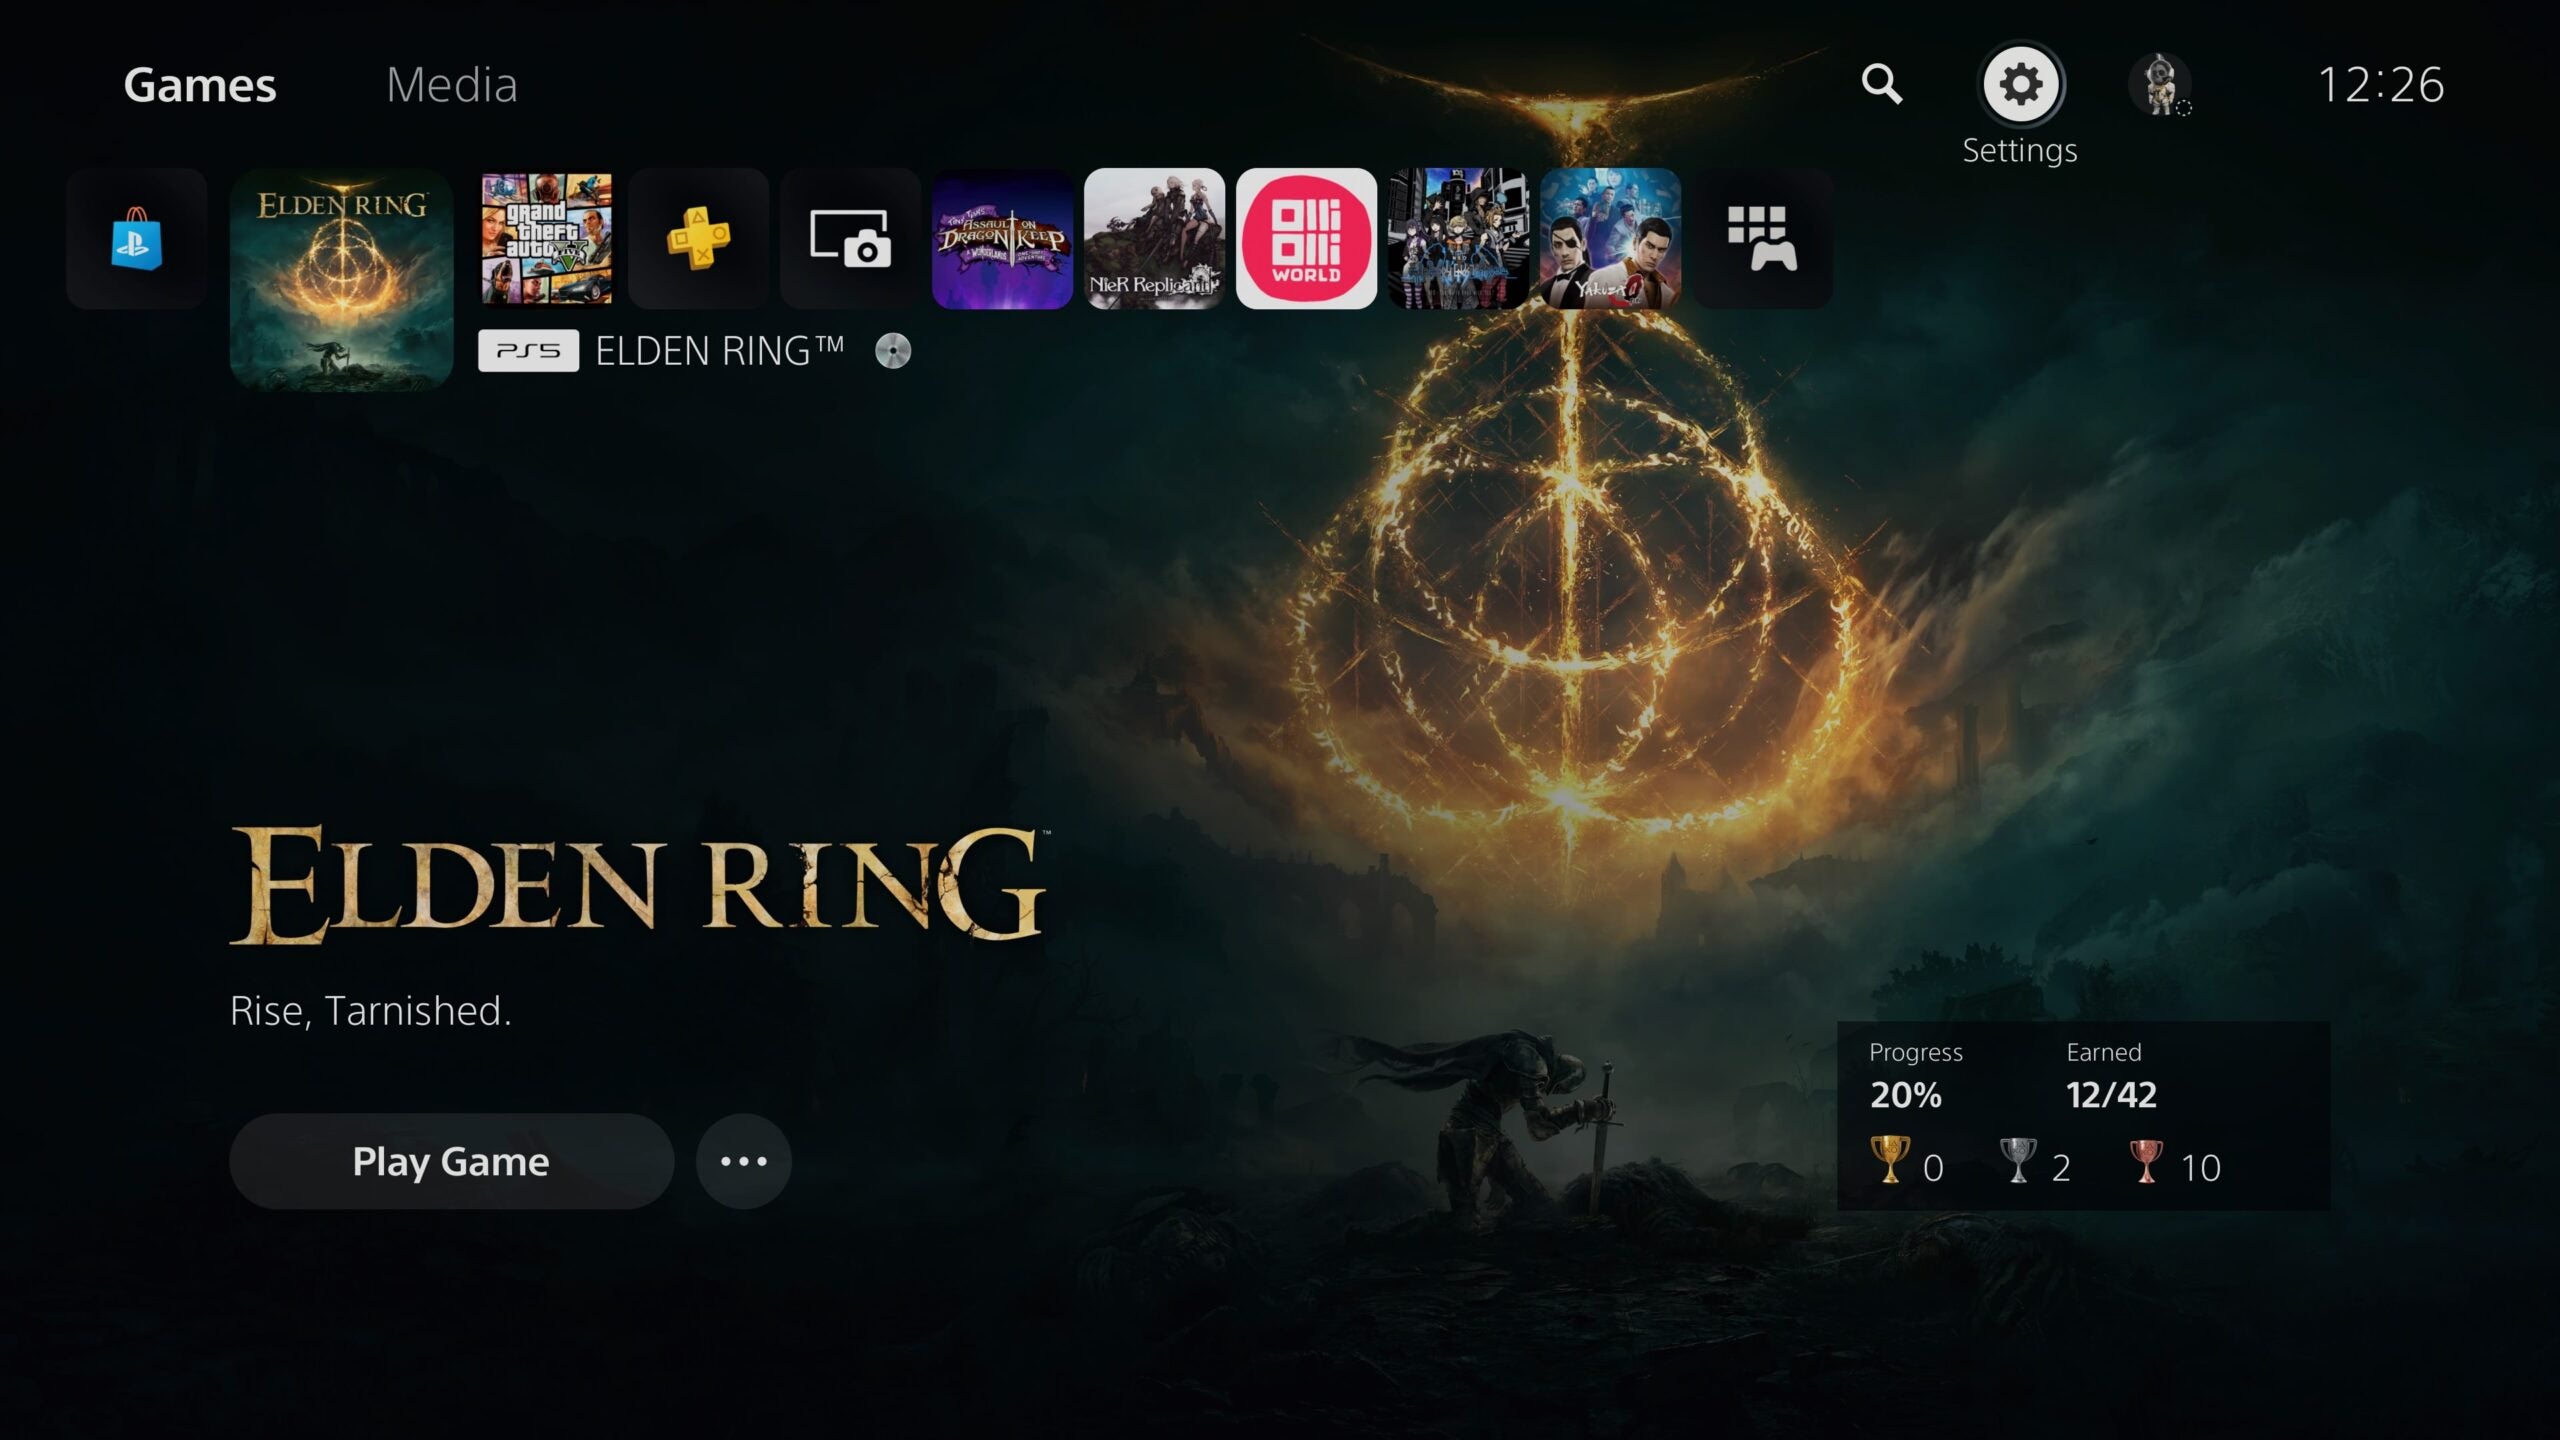 PS5 settings on home screen